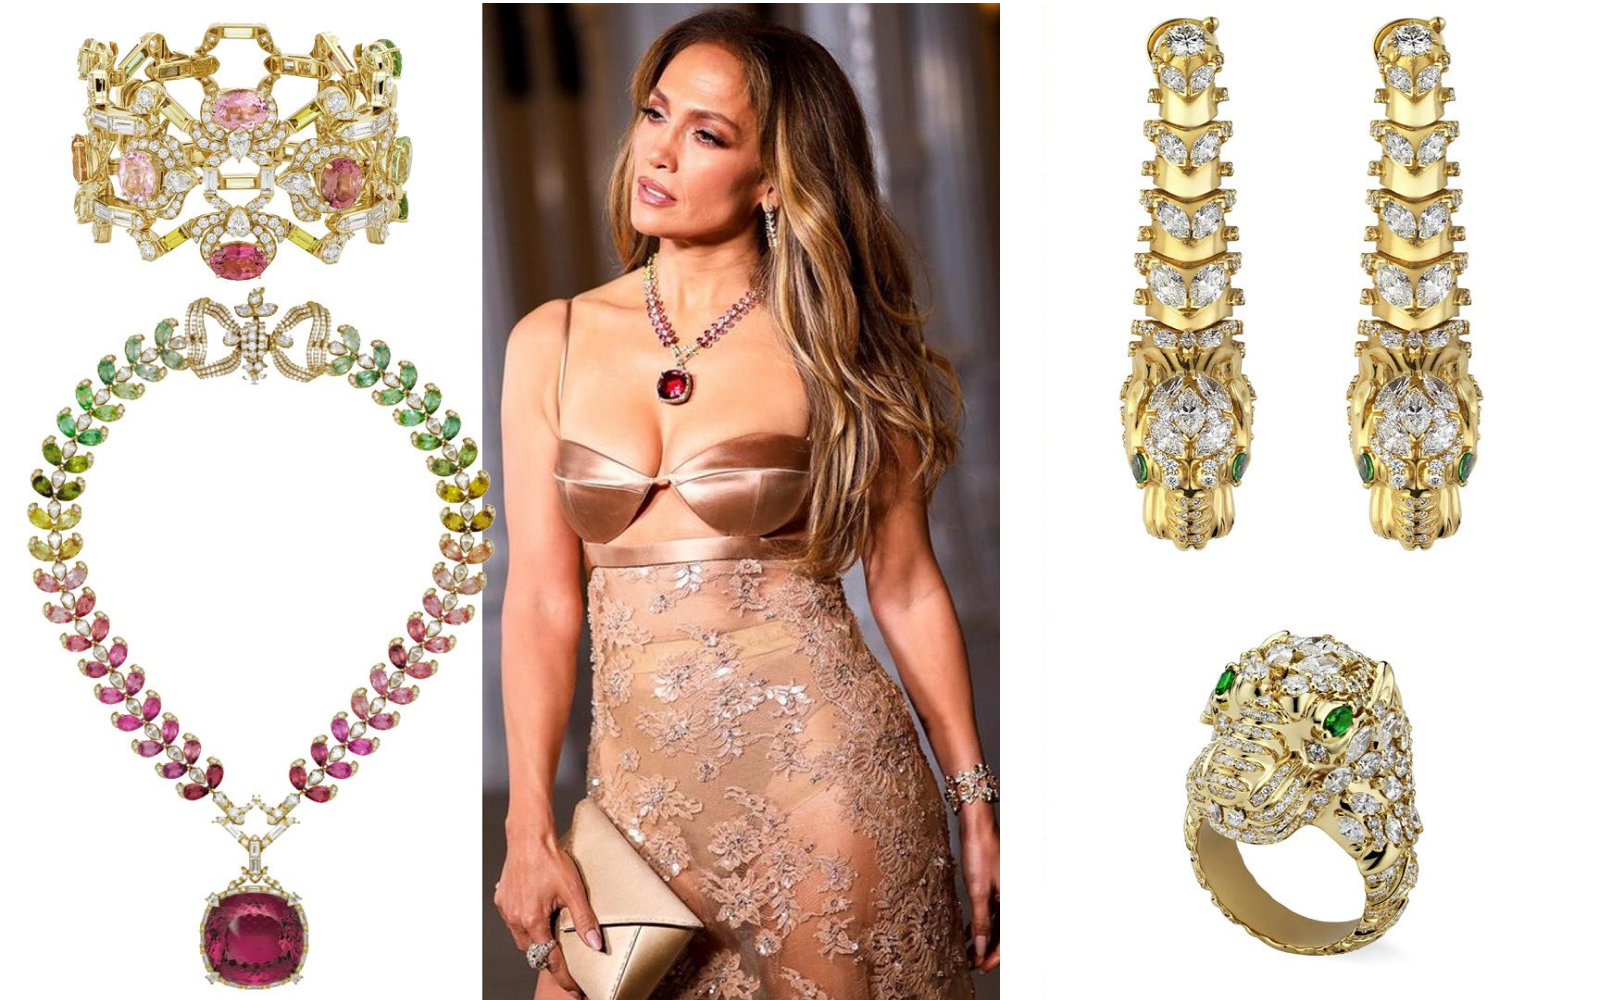 Jennifer Lopez stepped out at the 2023 LACMA Art + Film Gala wearing a suite of Gucci High Jewellery, including a 161-carat cushion-cut pink tourmaline pendant from the Allegoria collection, plus a multi-gem bracelet, a ring, and earrings featuring the Gucci lion emblem